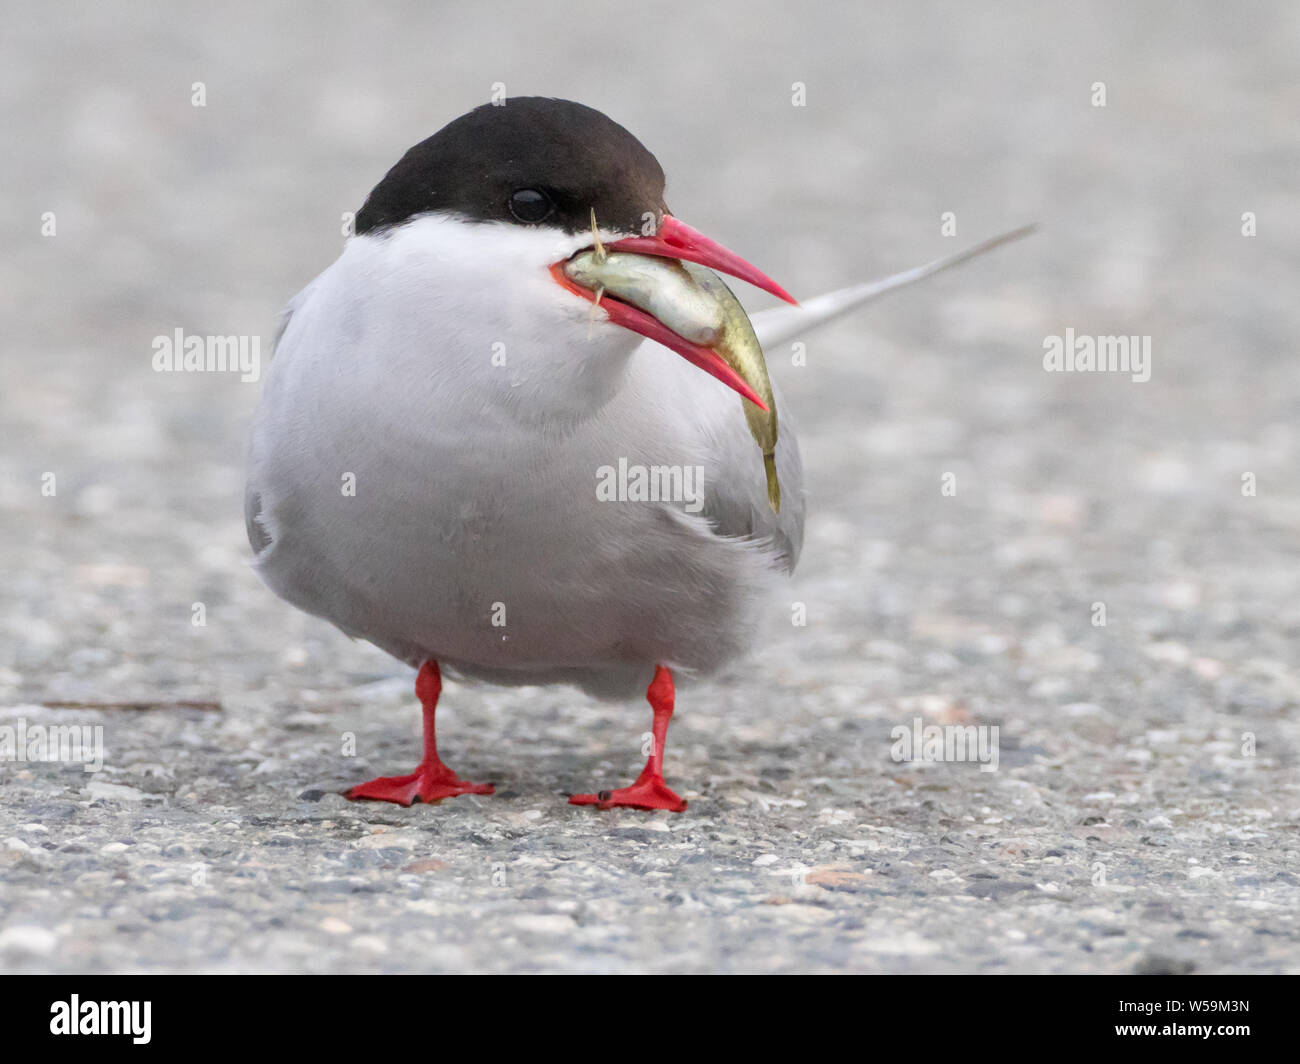 Arctic tern, Sterna paradisaea, the longest migrating bird with a fish in its beak at Potters marsh, Anchorage Alaska Stock Photo